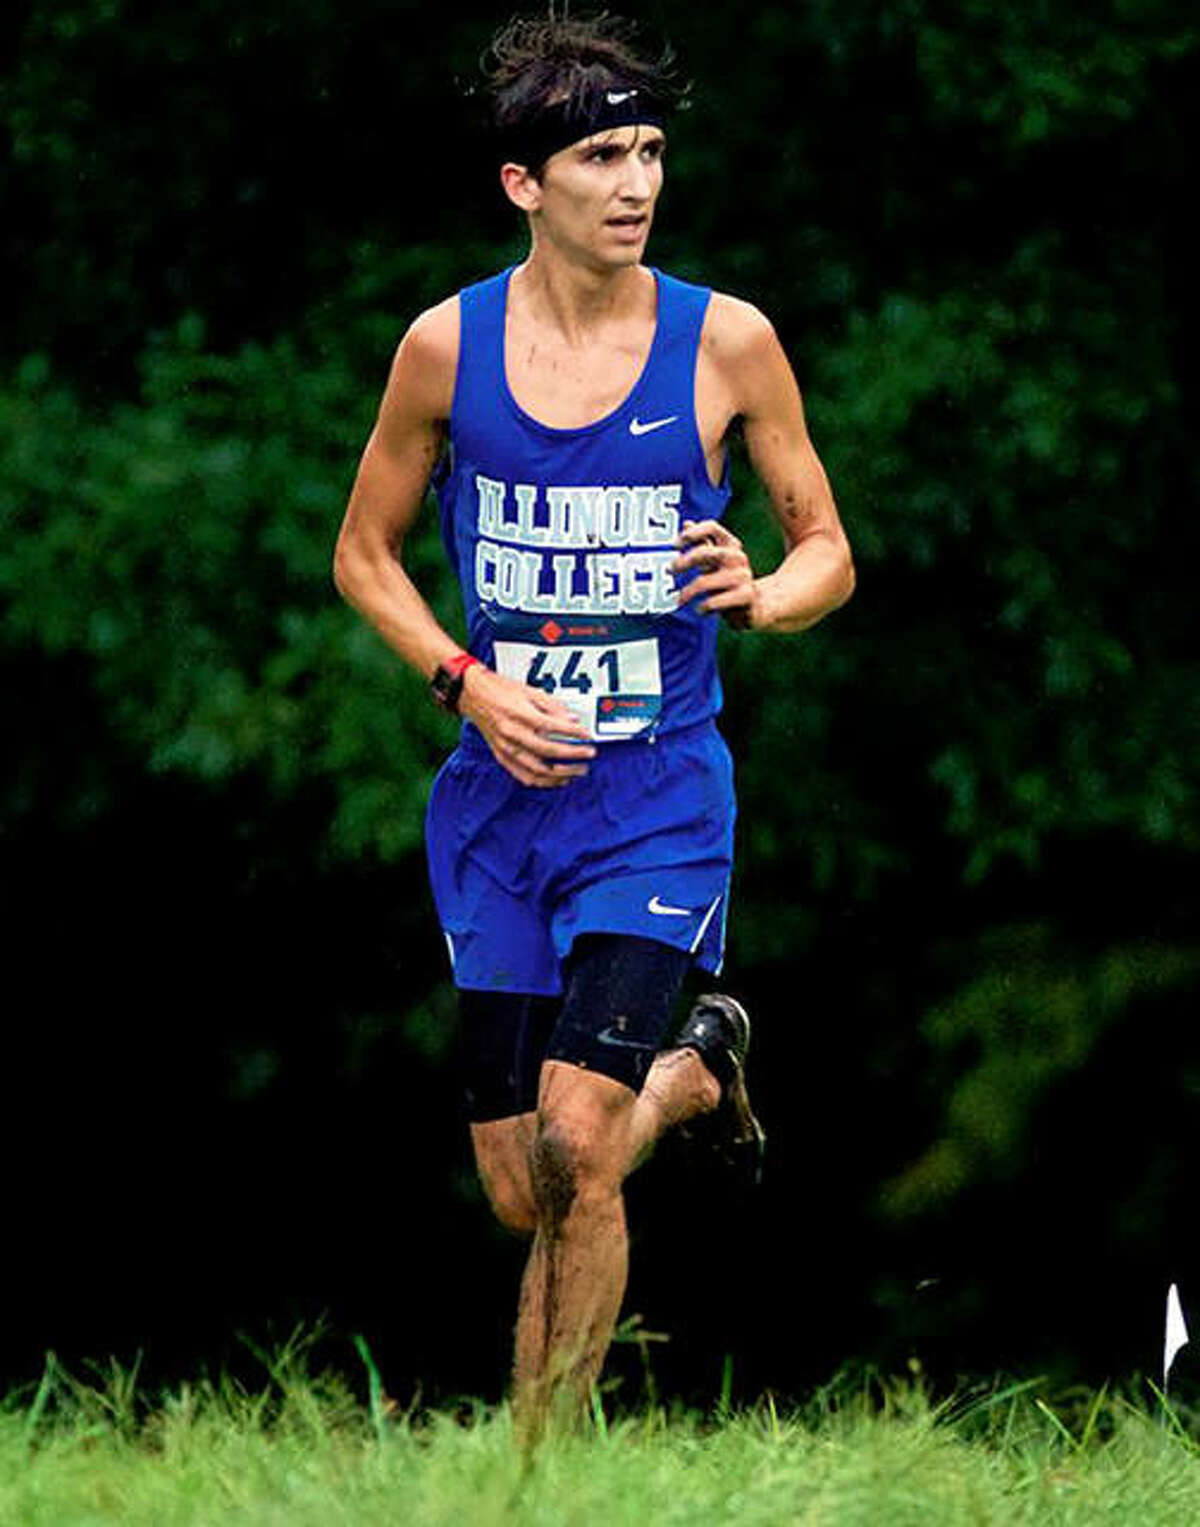 Illinois College’s Grant Seniker, a sophomore from Brighton and a Southwestern High graduate, opened the Blueboys cross country season Friday by setting a school record at the Illinois Wesleyan Titan Opener at Maxwell Park in Normal. Seniker led the Blueboys by finishing 17th in the 5K race with a time of 16 minutes, 50.03 seconds, breaking the record set by Mark Ryan in 2008 by nearly 10 seconds. Grant is the son of Chris and Sarah Seniker of Brighton.